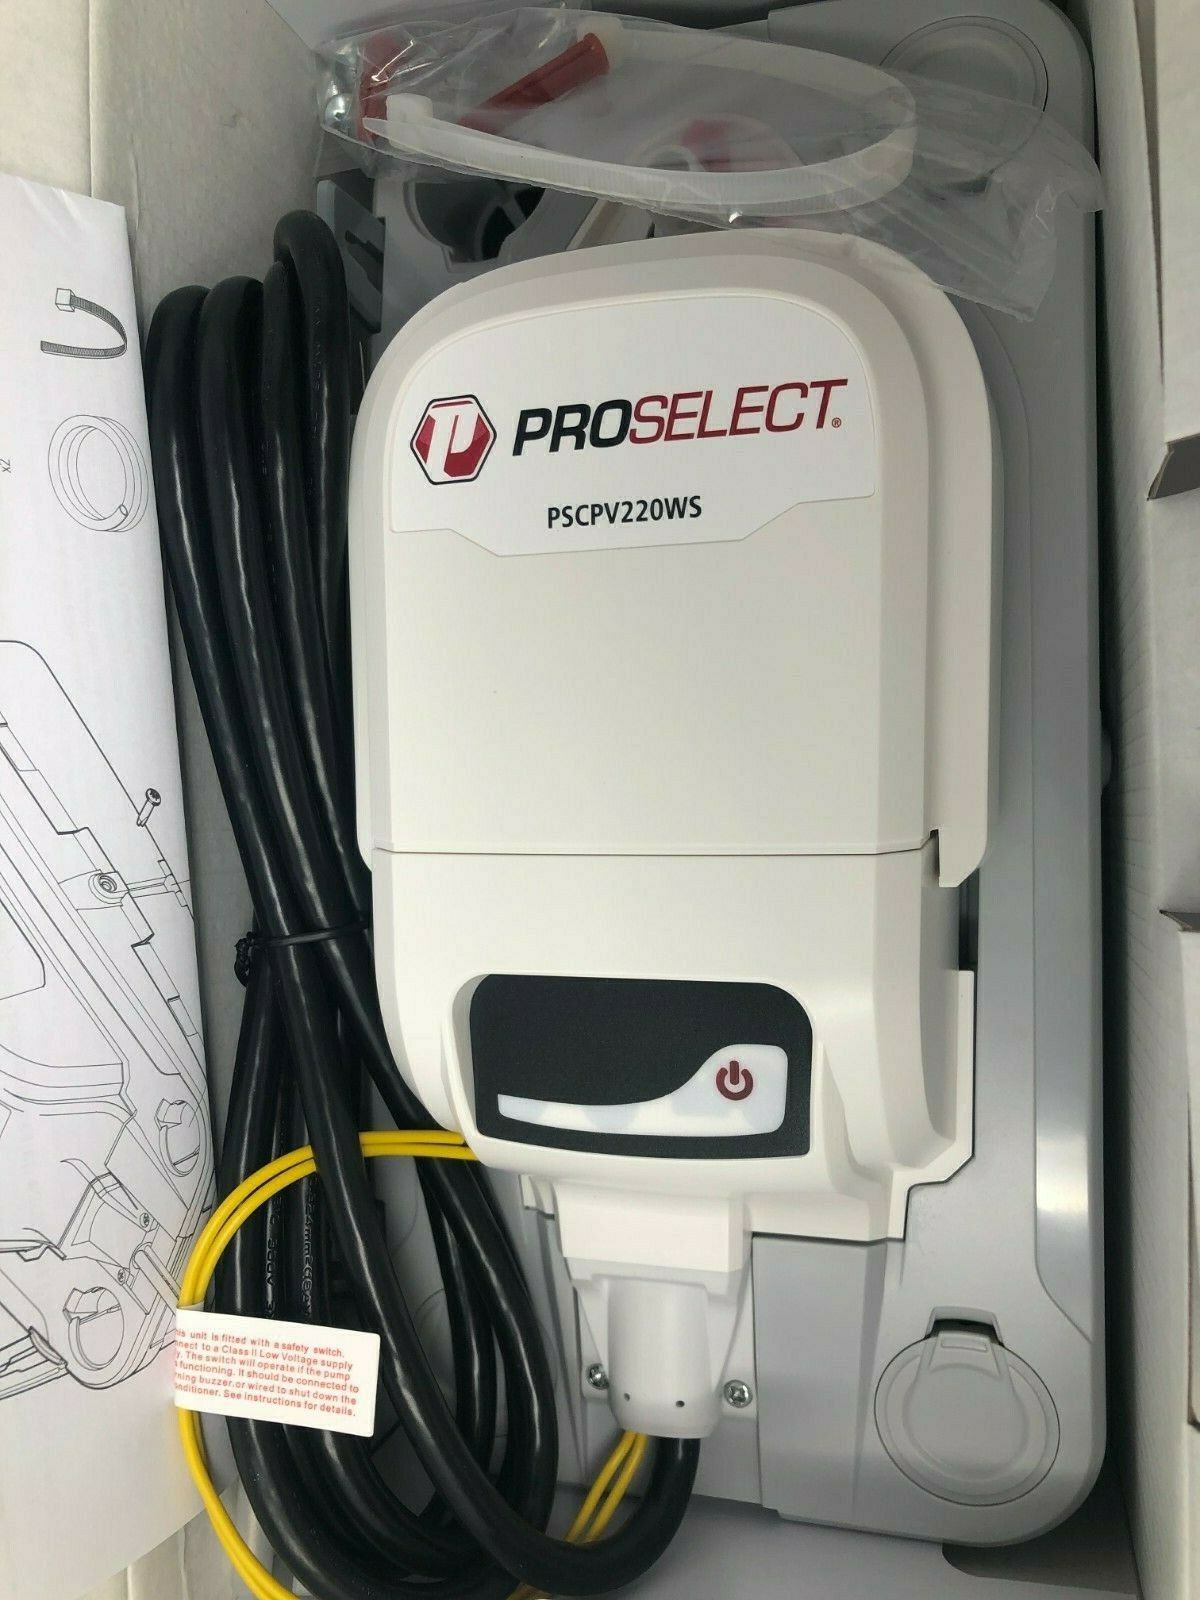 proselect condensate pump pscpv215ws red light